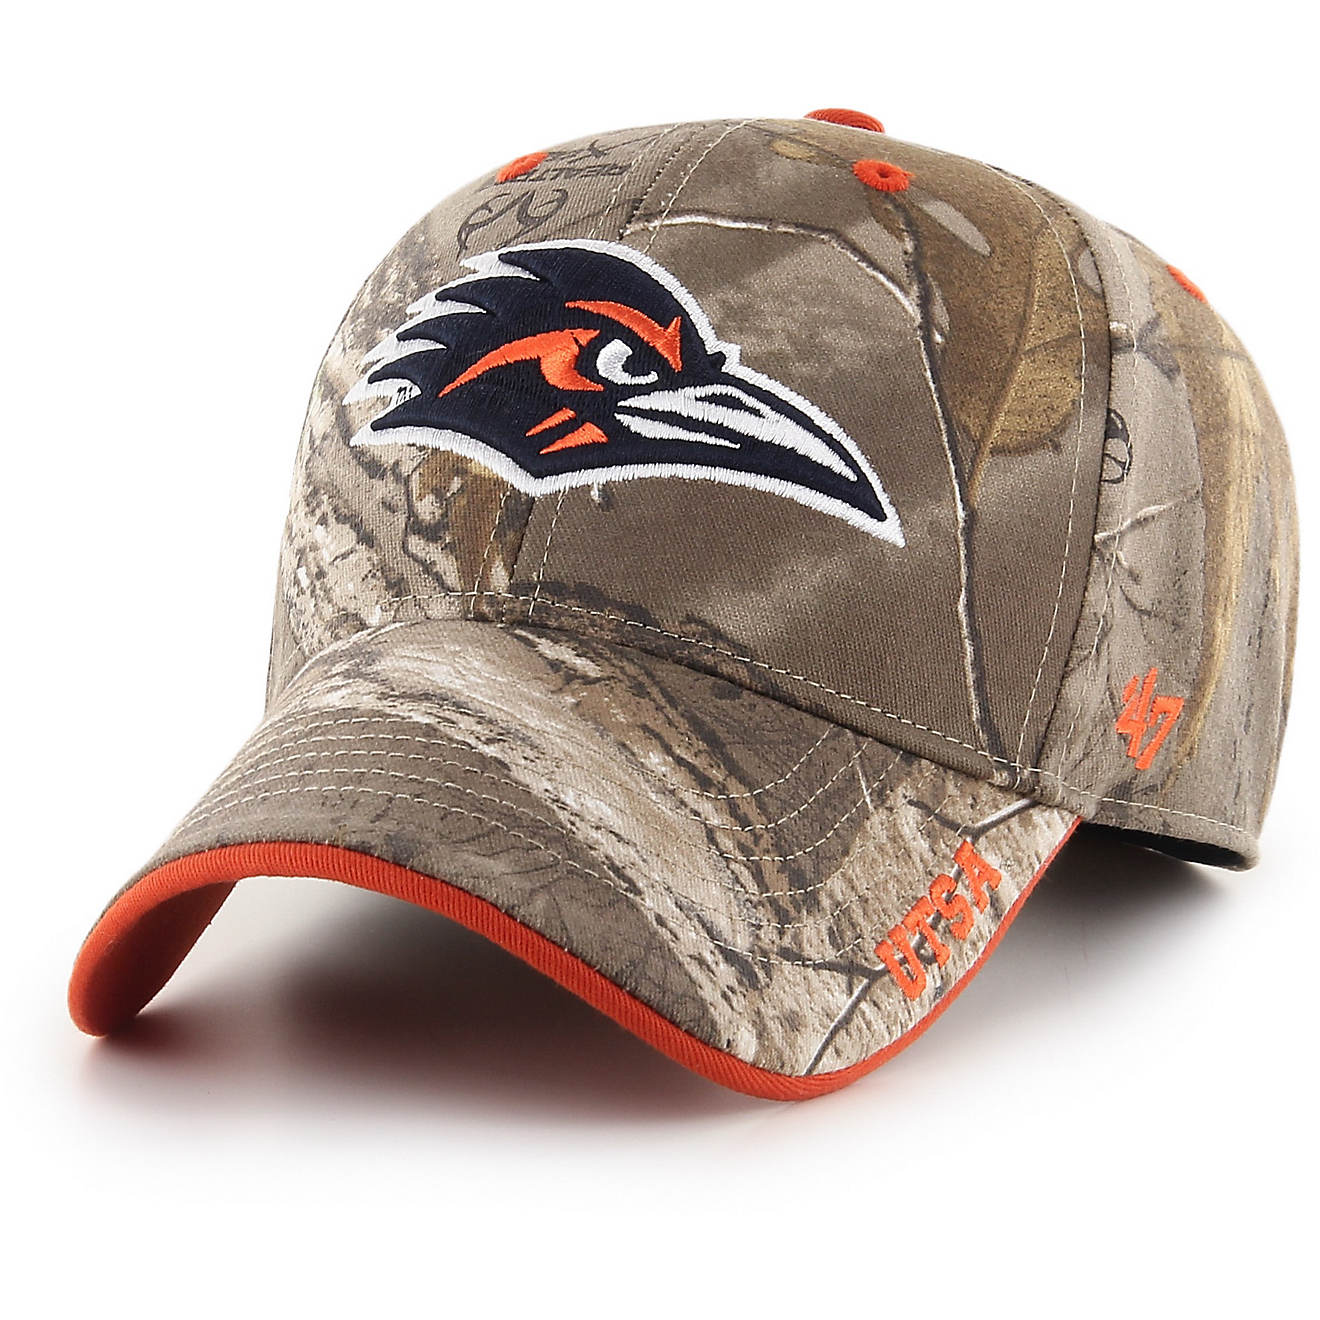 '47 Adults' University of Texas at San Antonio Realtree Frost MVP Cap                                                            - view number 1